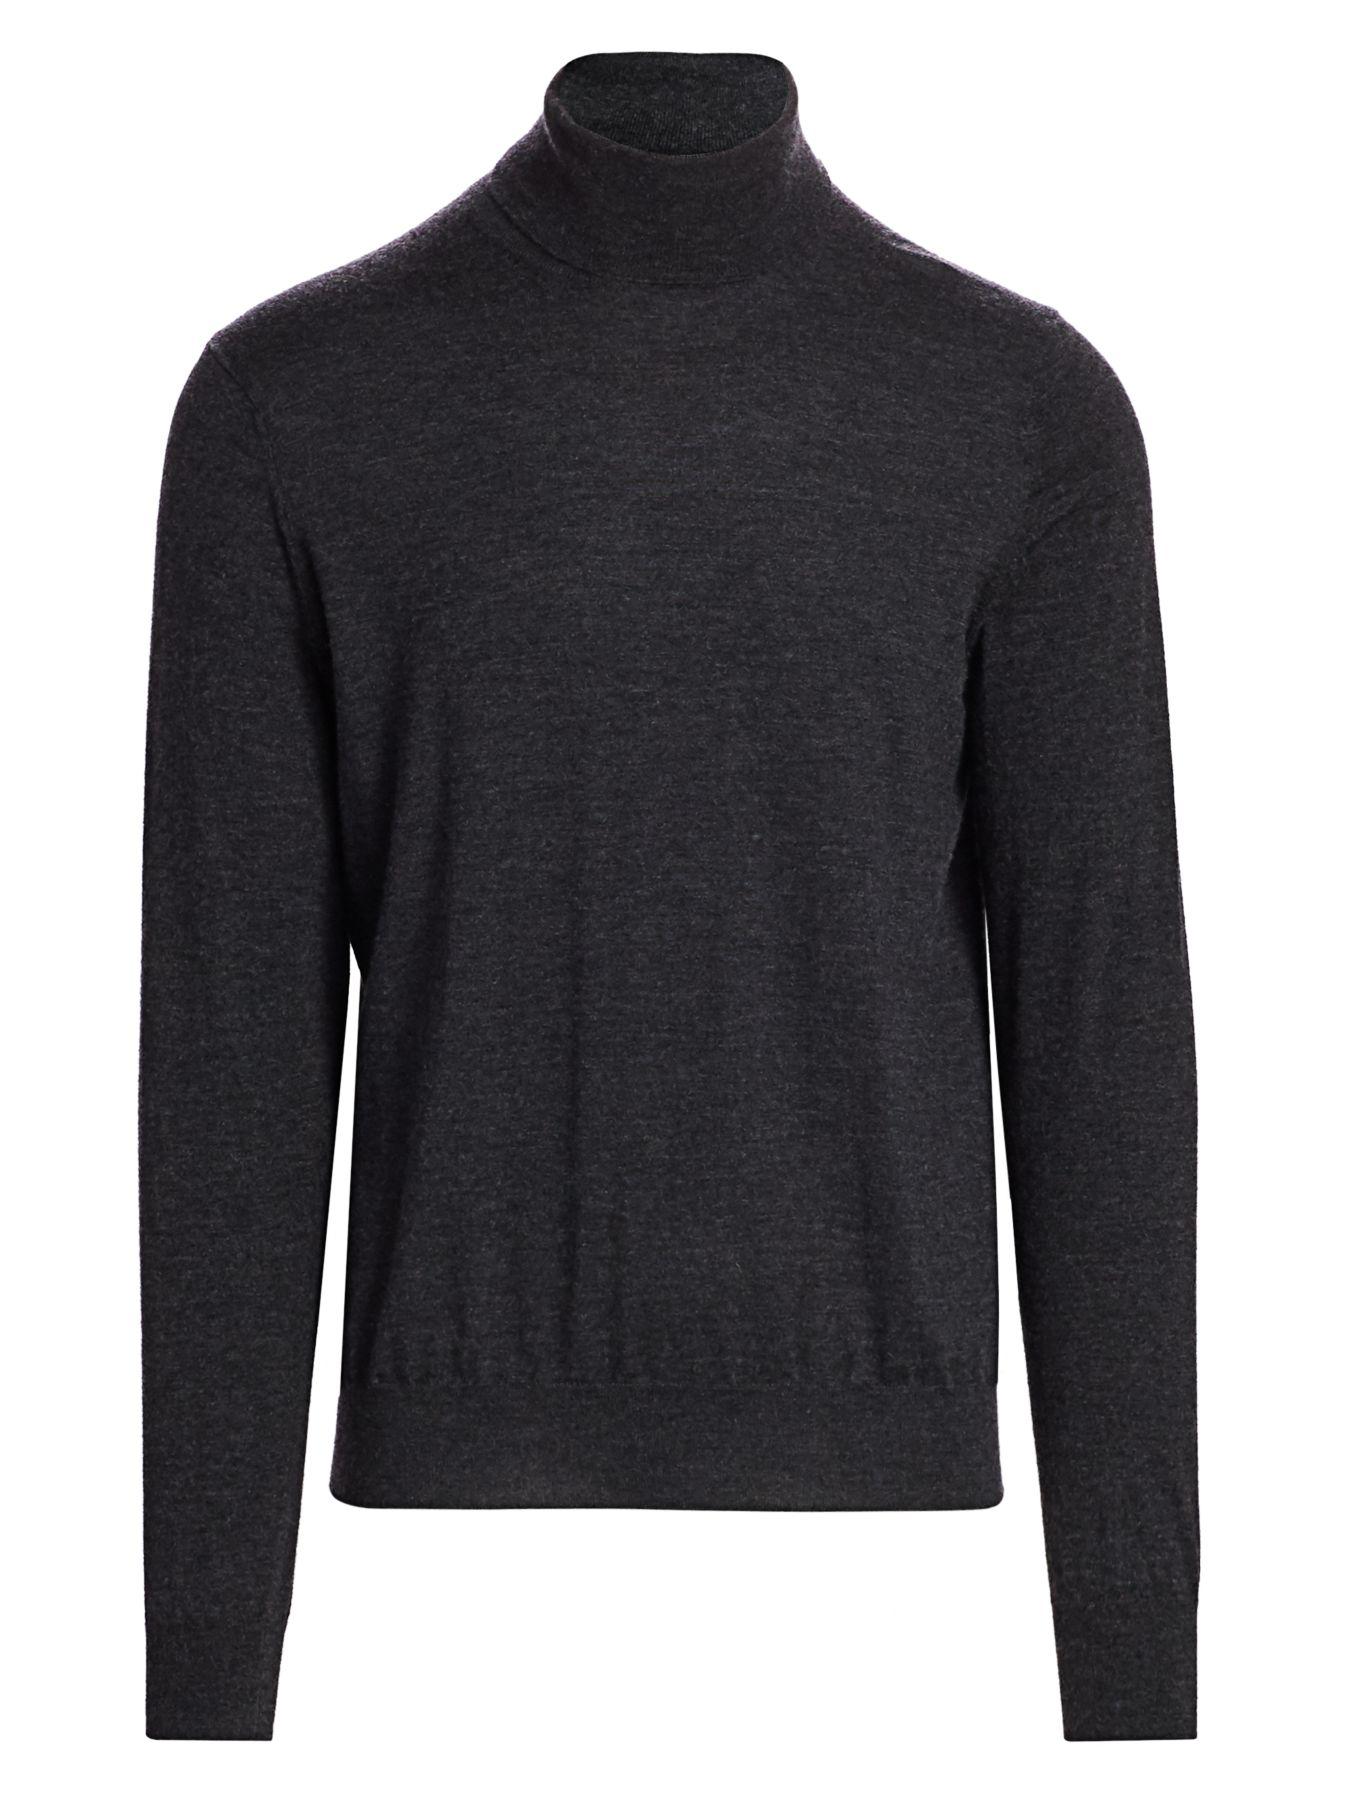 Saks Fifth Avenue Collection Lightweight Cashmere Turtleneck Sweater in ...